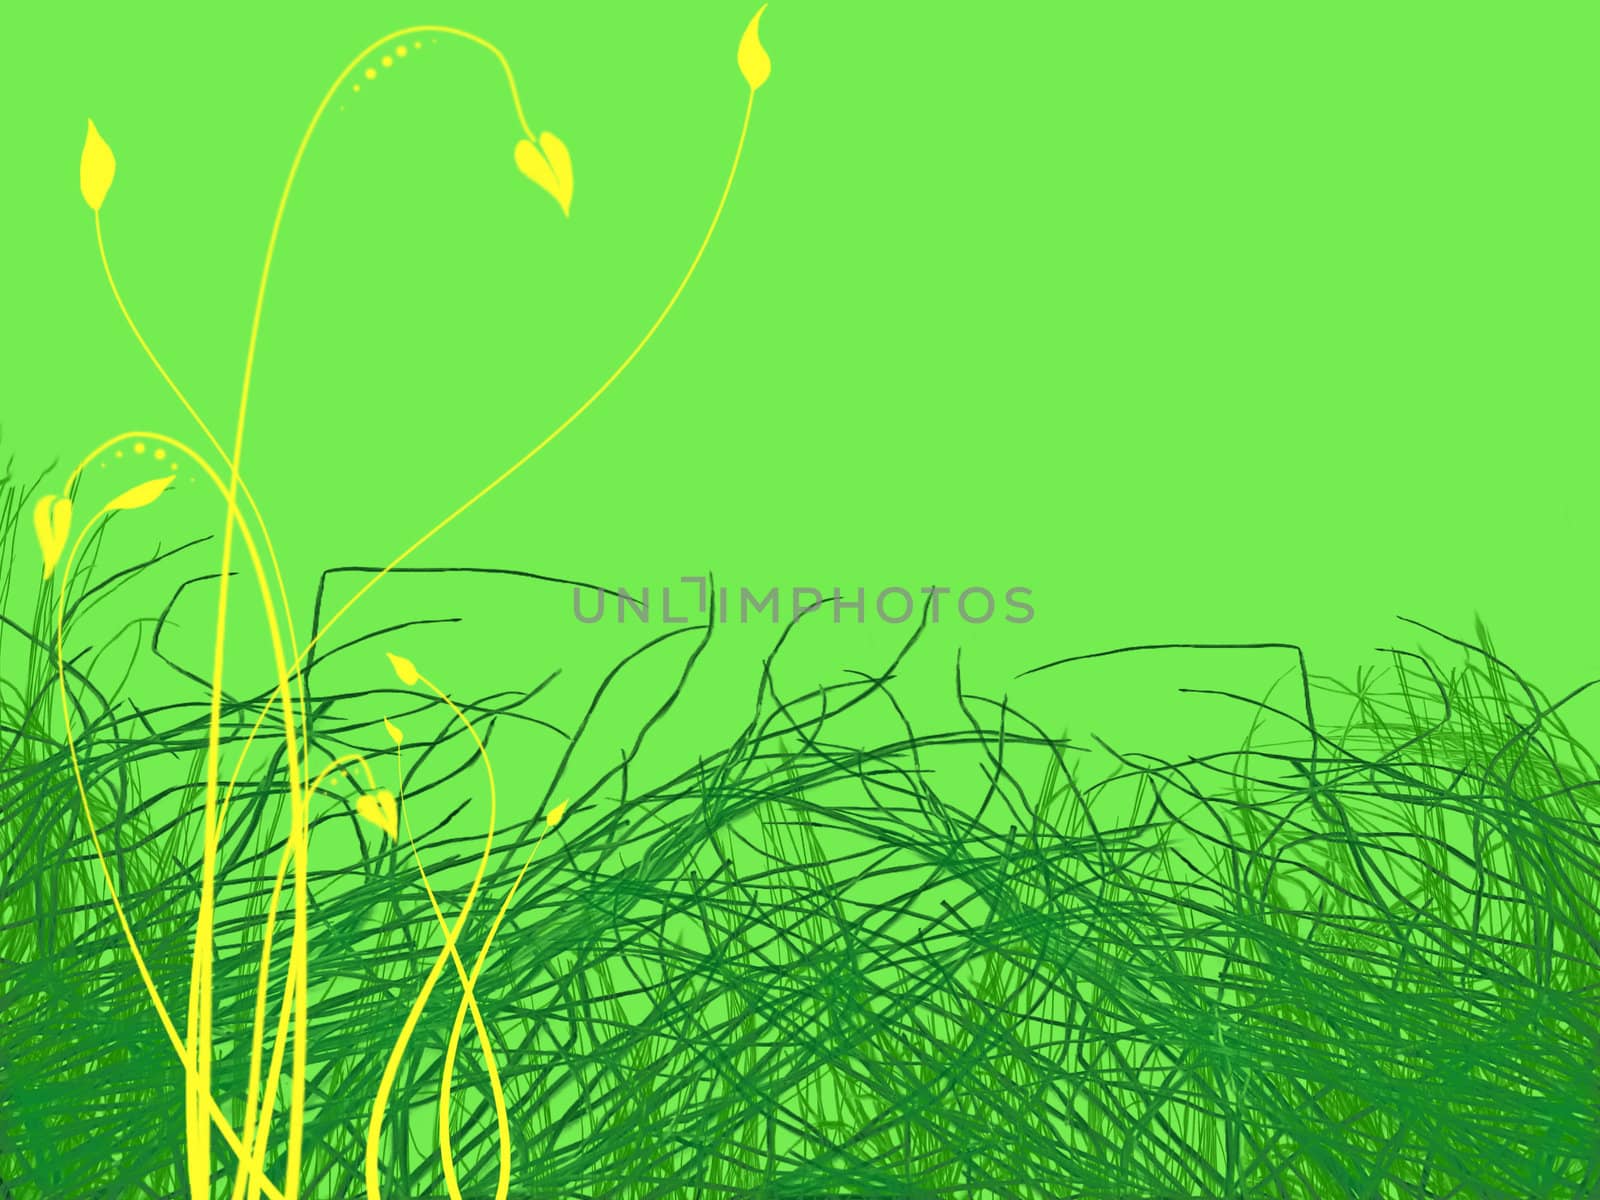 Green Grass and Yellow Flowers Illustration on Cool Green Background